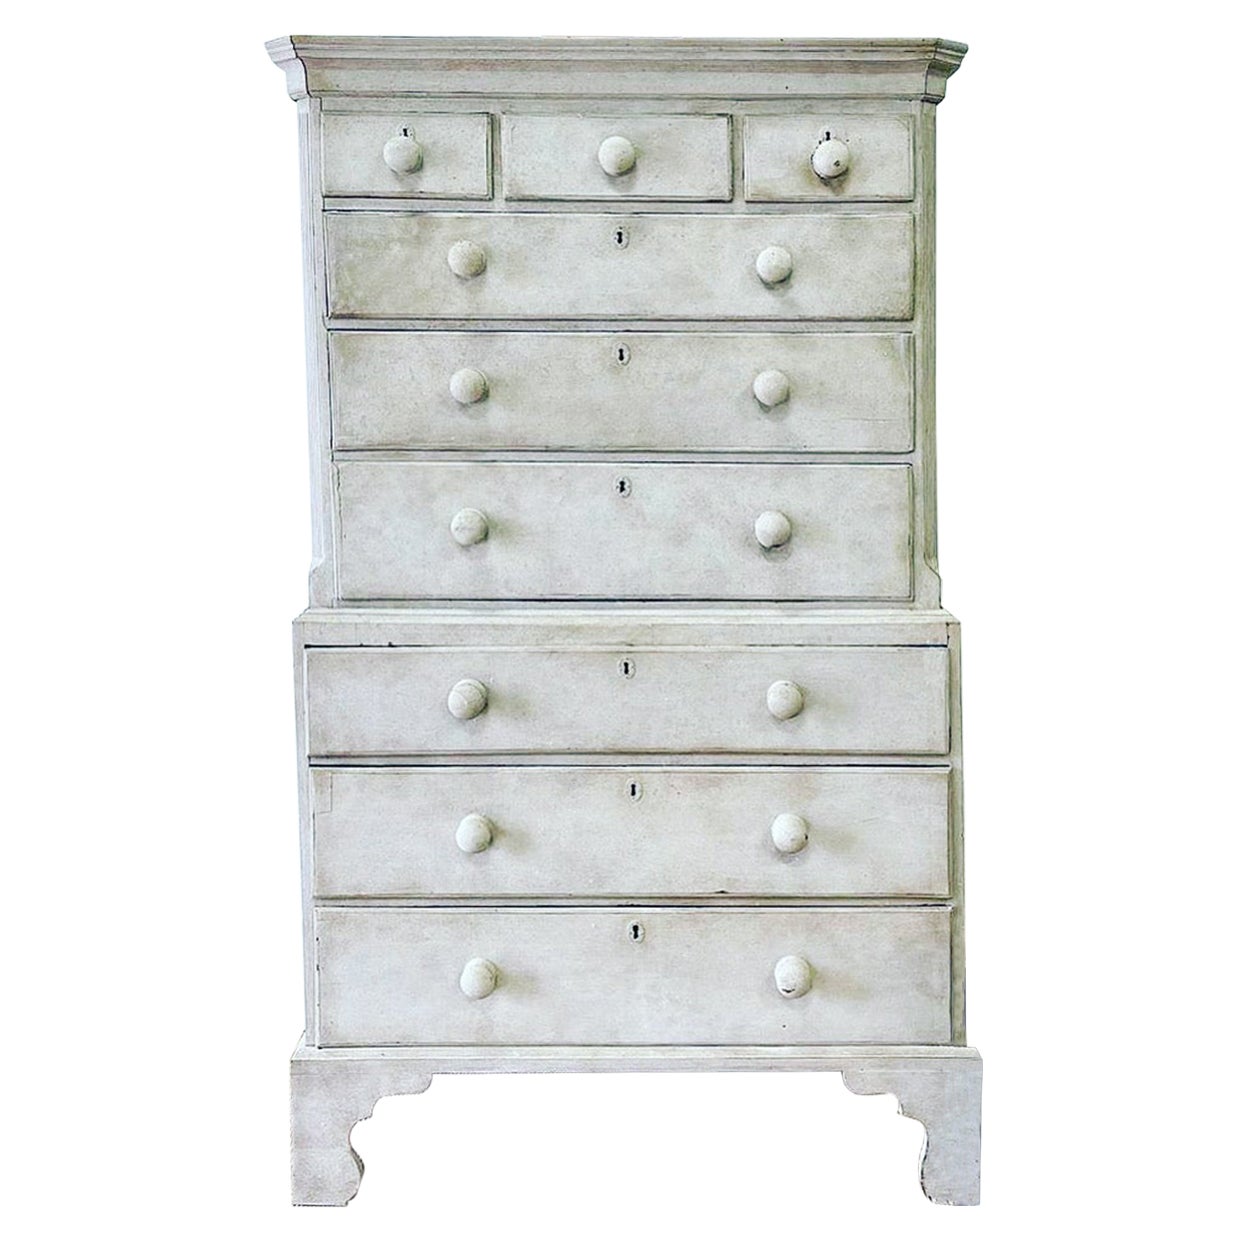 A Stately Antique English Painted Highboy c1790